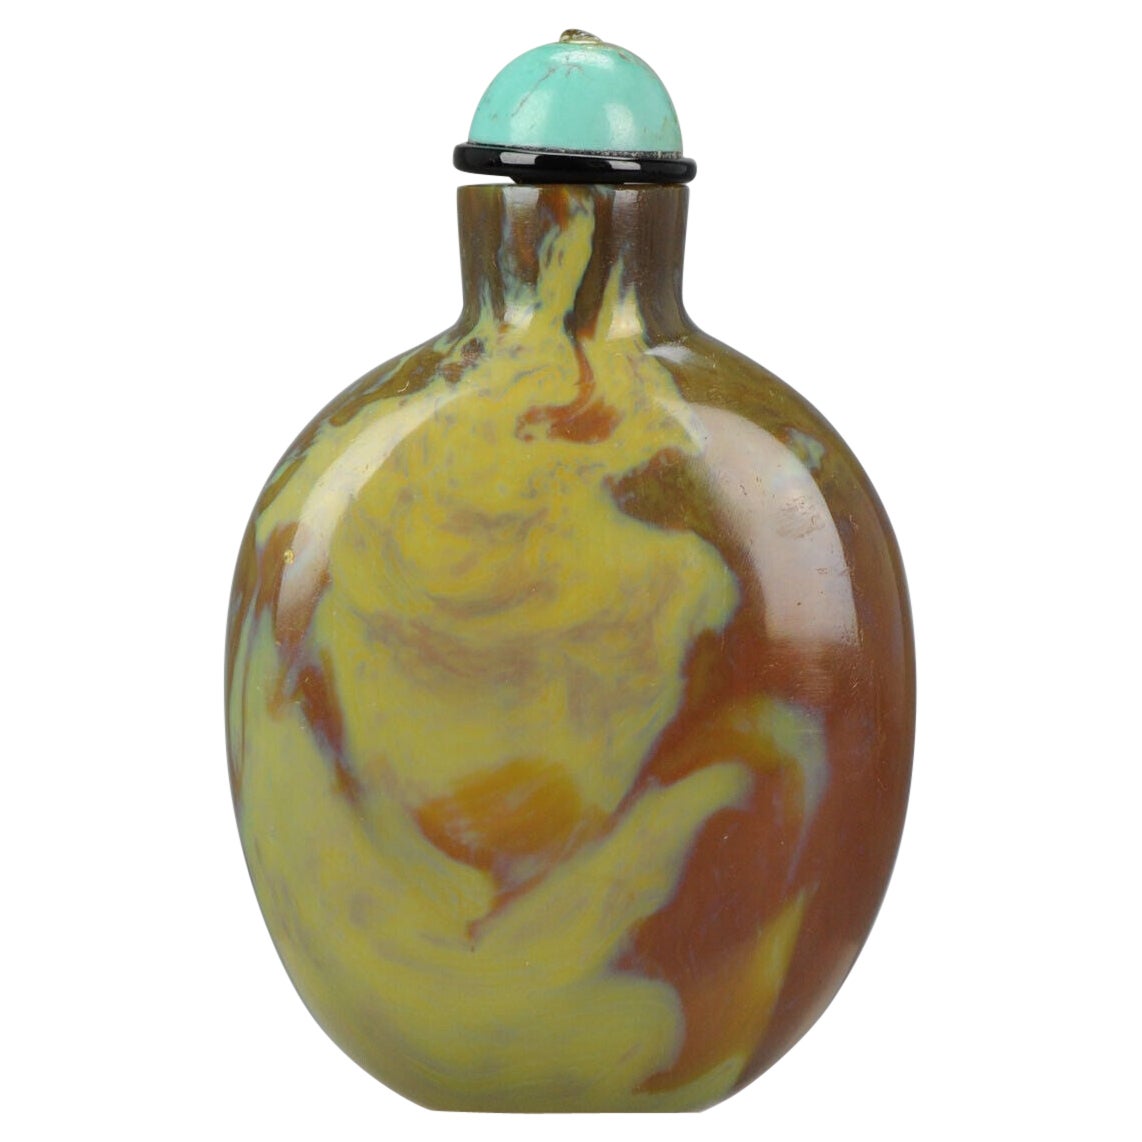 Antique Chinese Glass Snuff Bottle Immitating Gemstone Qing Dynasty, 18th C